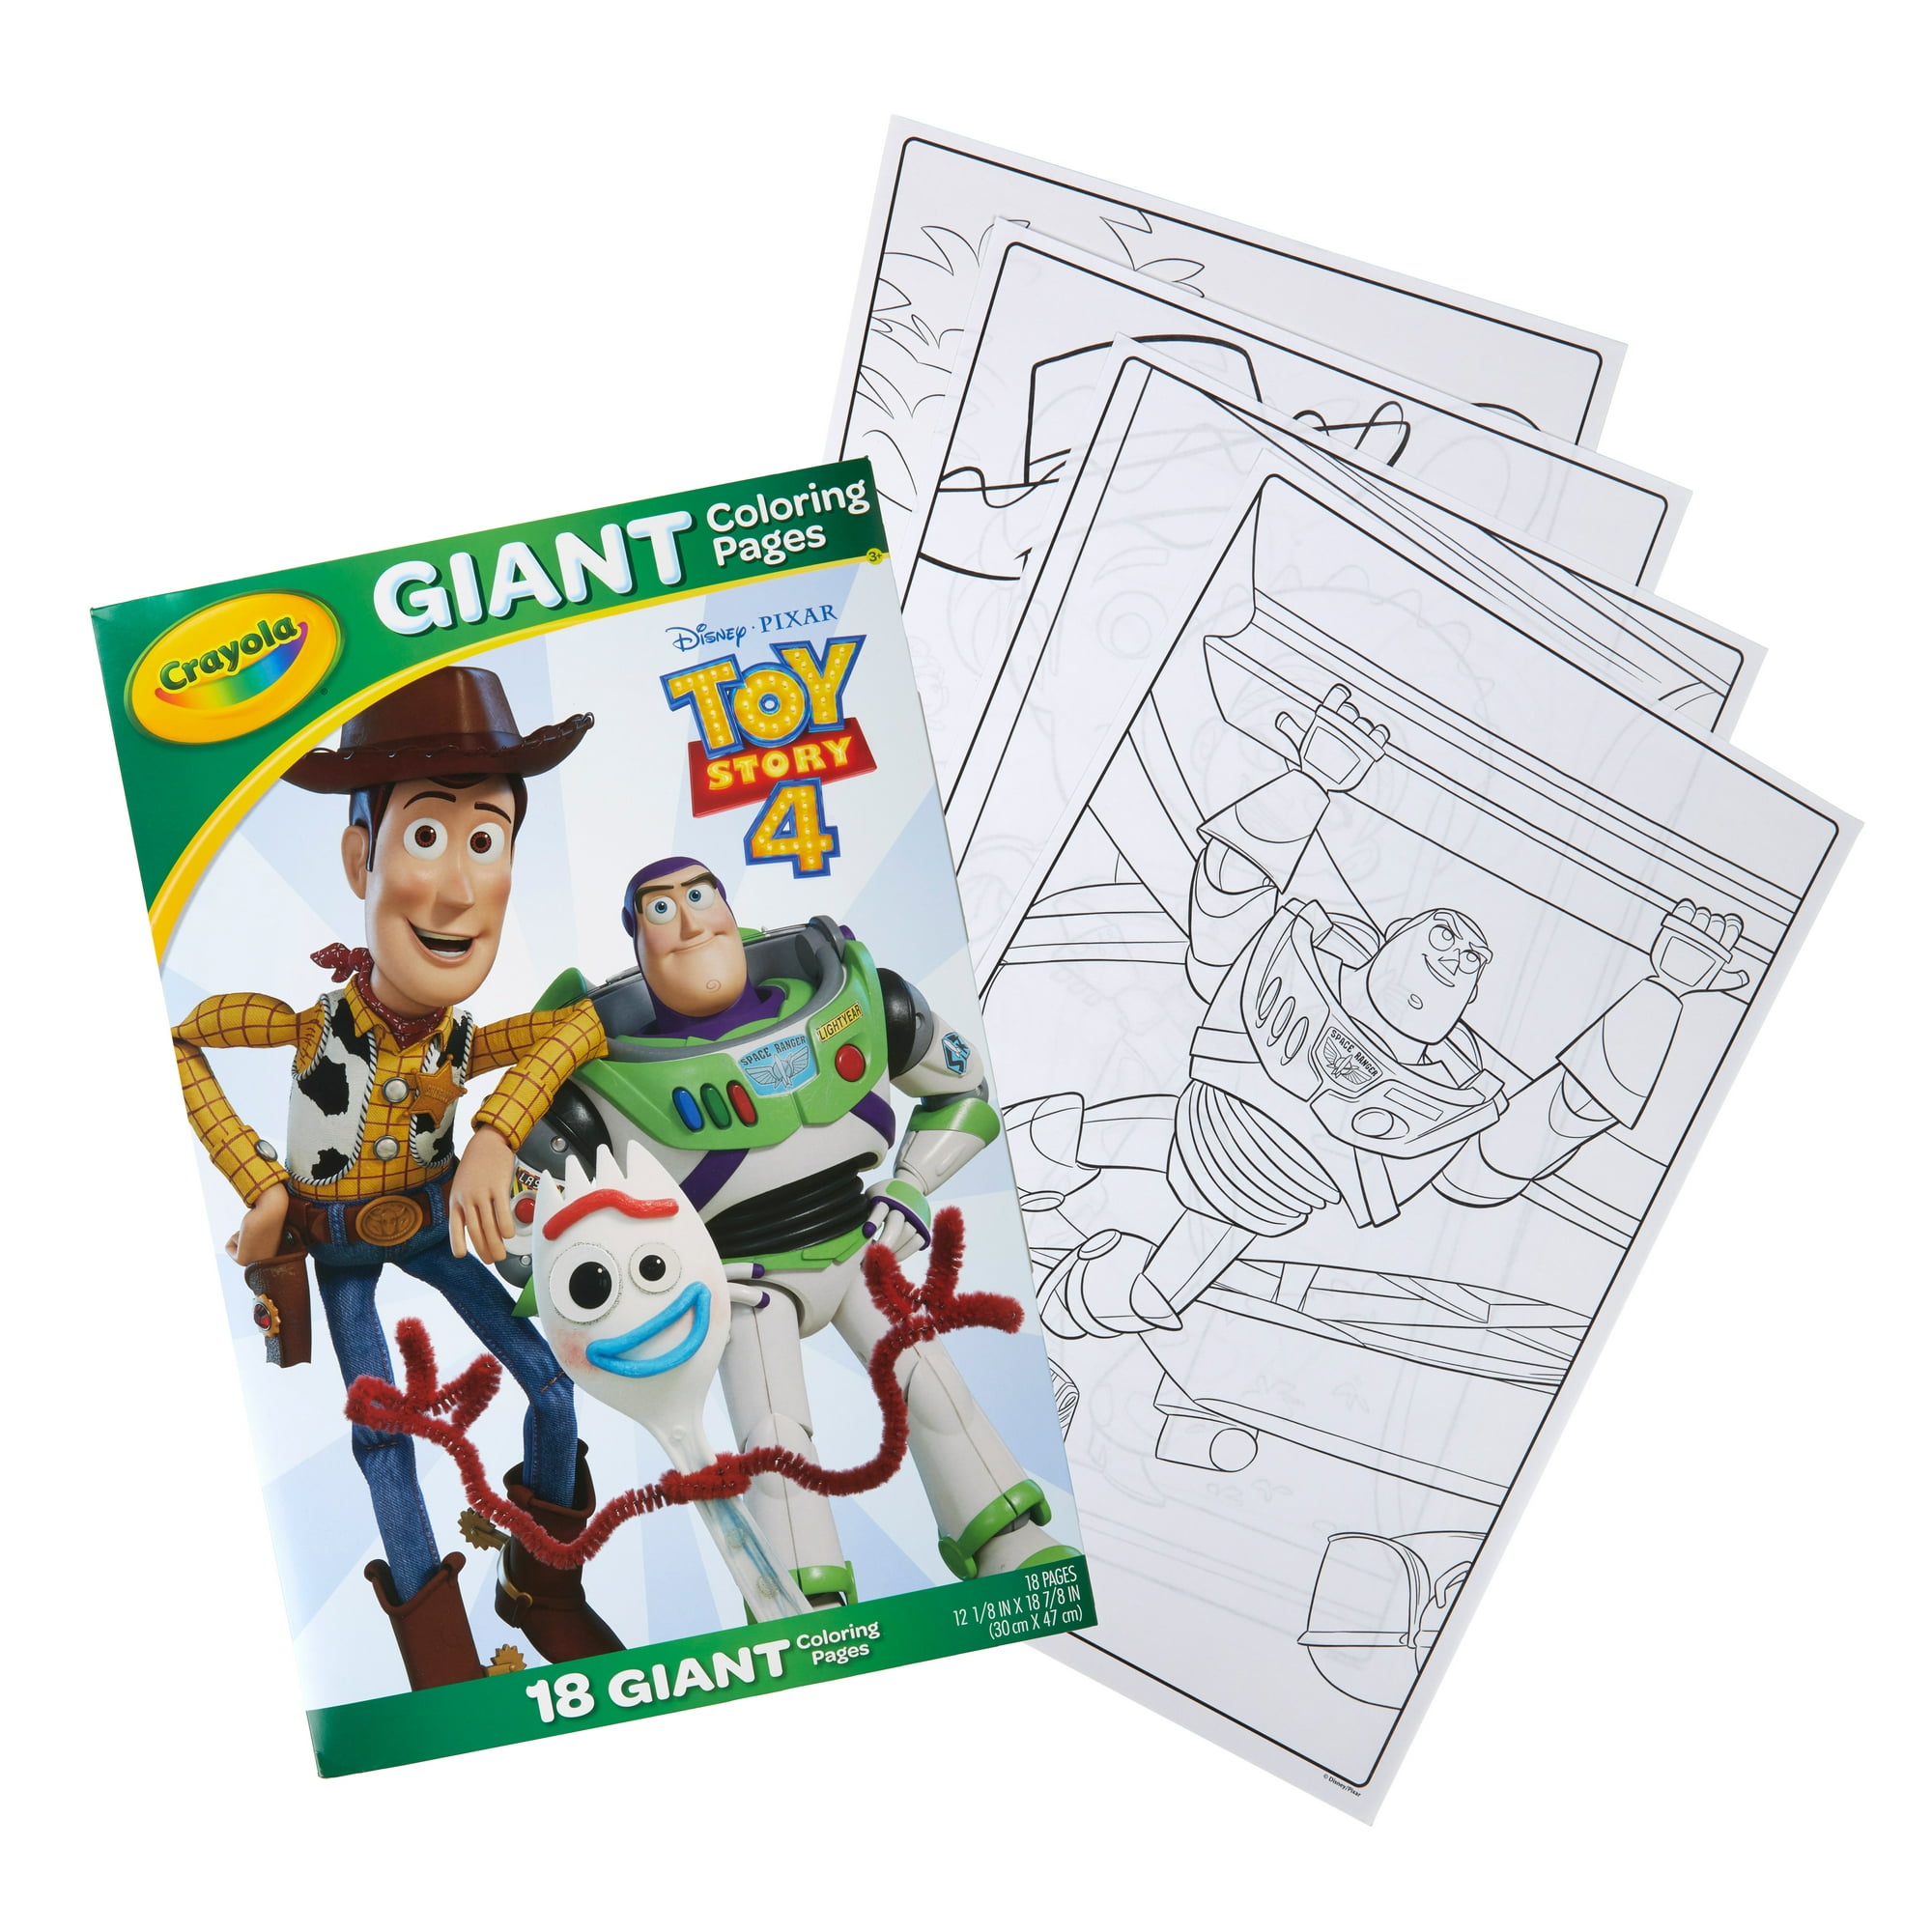 toy story characters coloring page